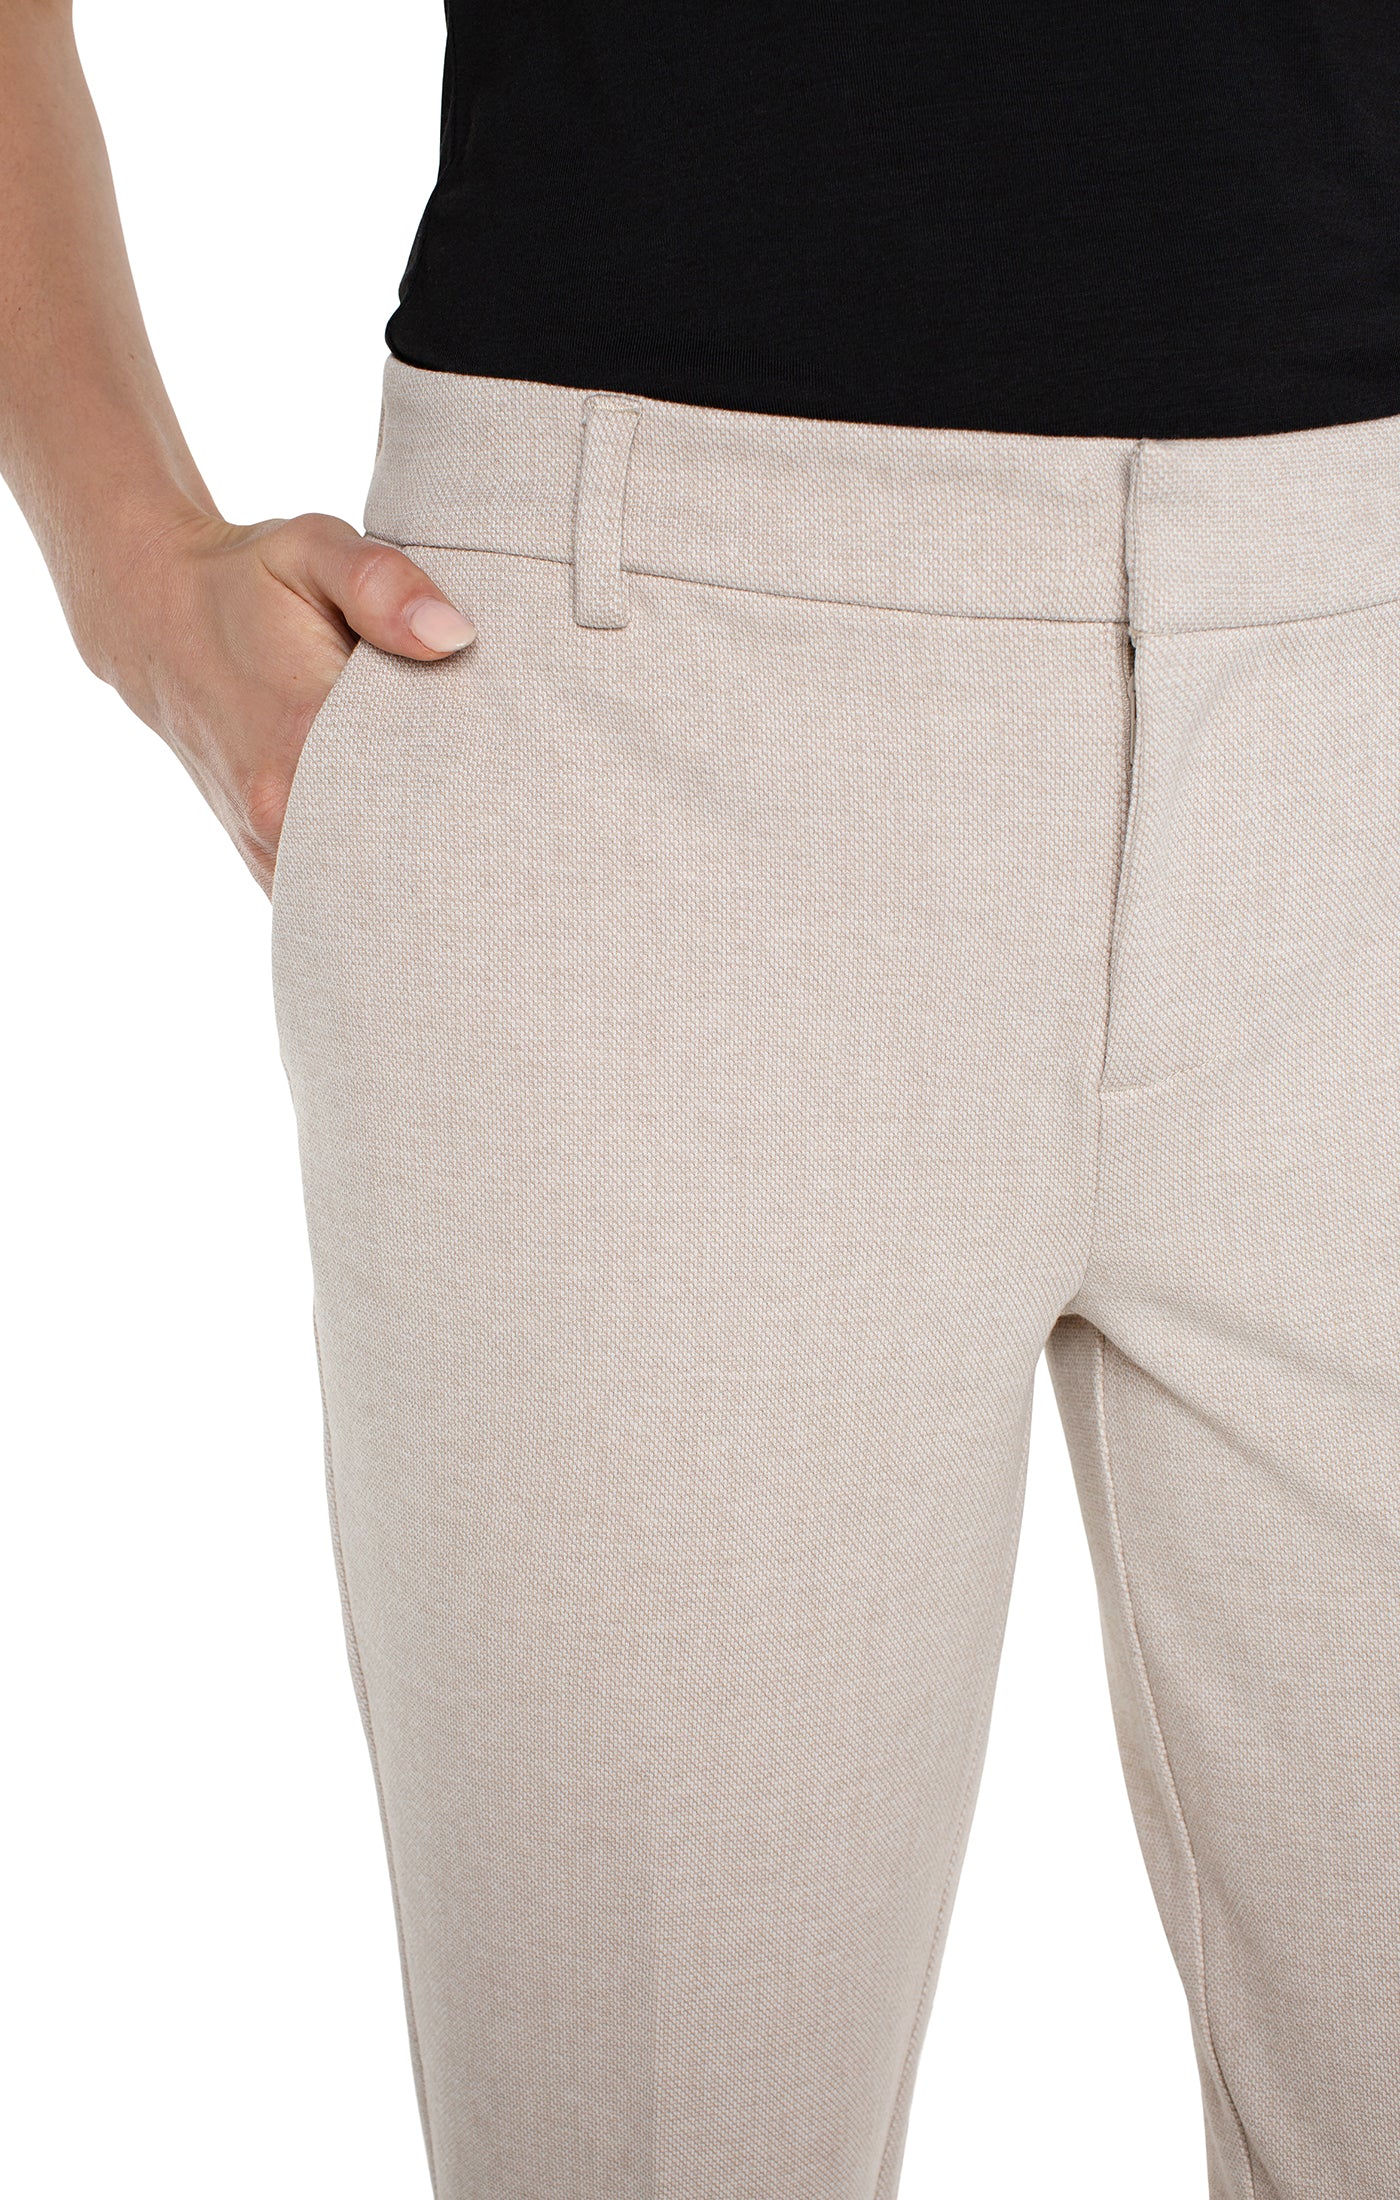 Liverpool Kesley Trouser - Stone Tan Close Up View